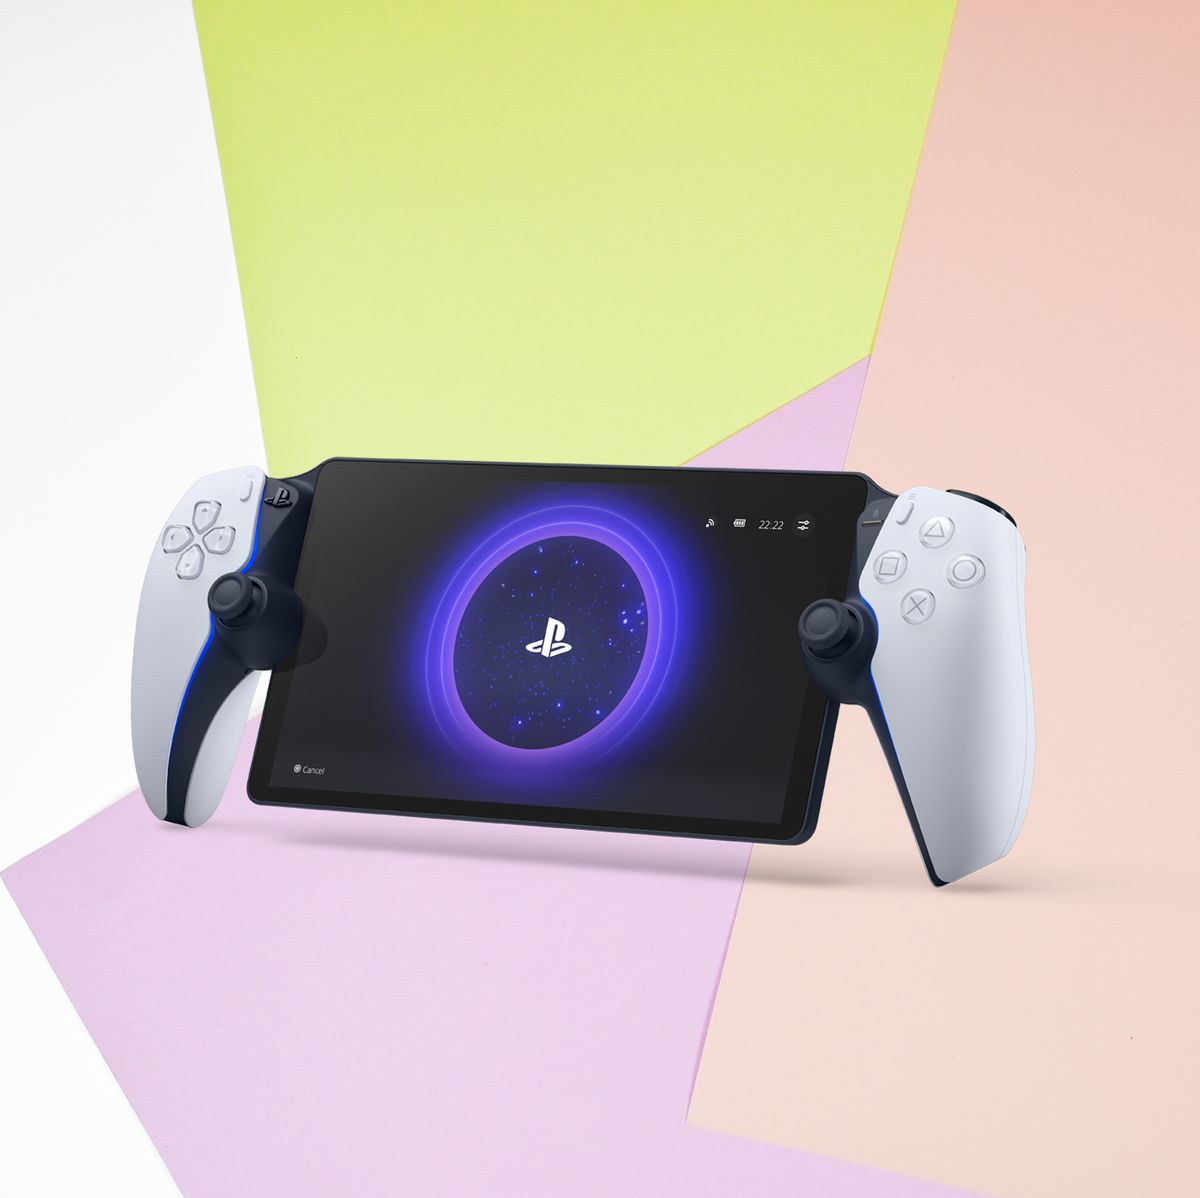 PlayStation Portal stock UK - where to buy